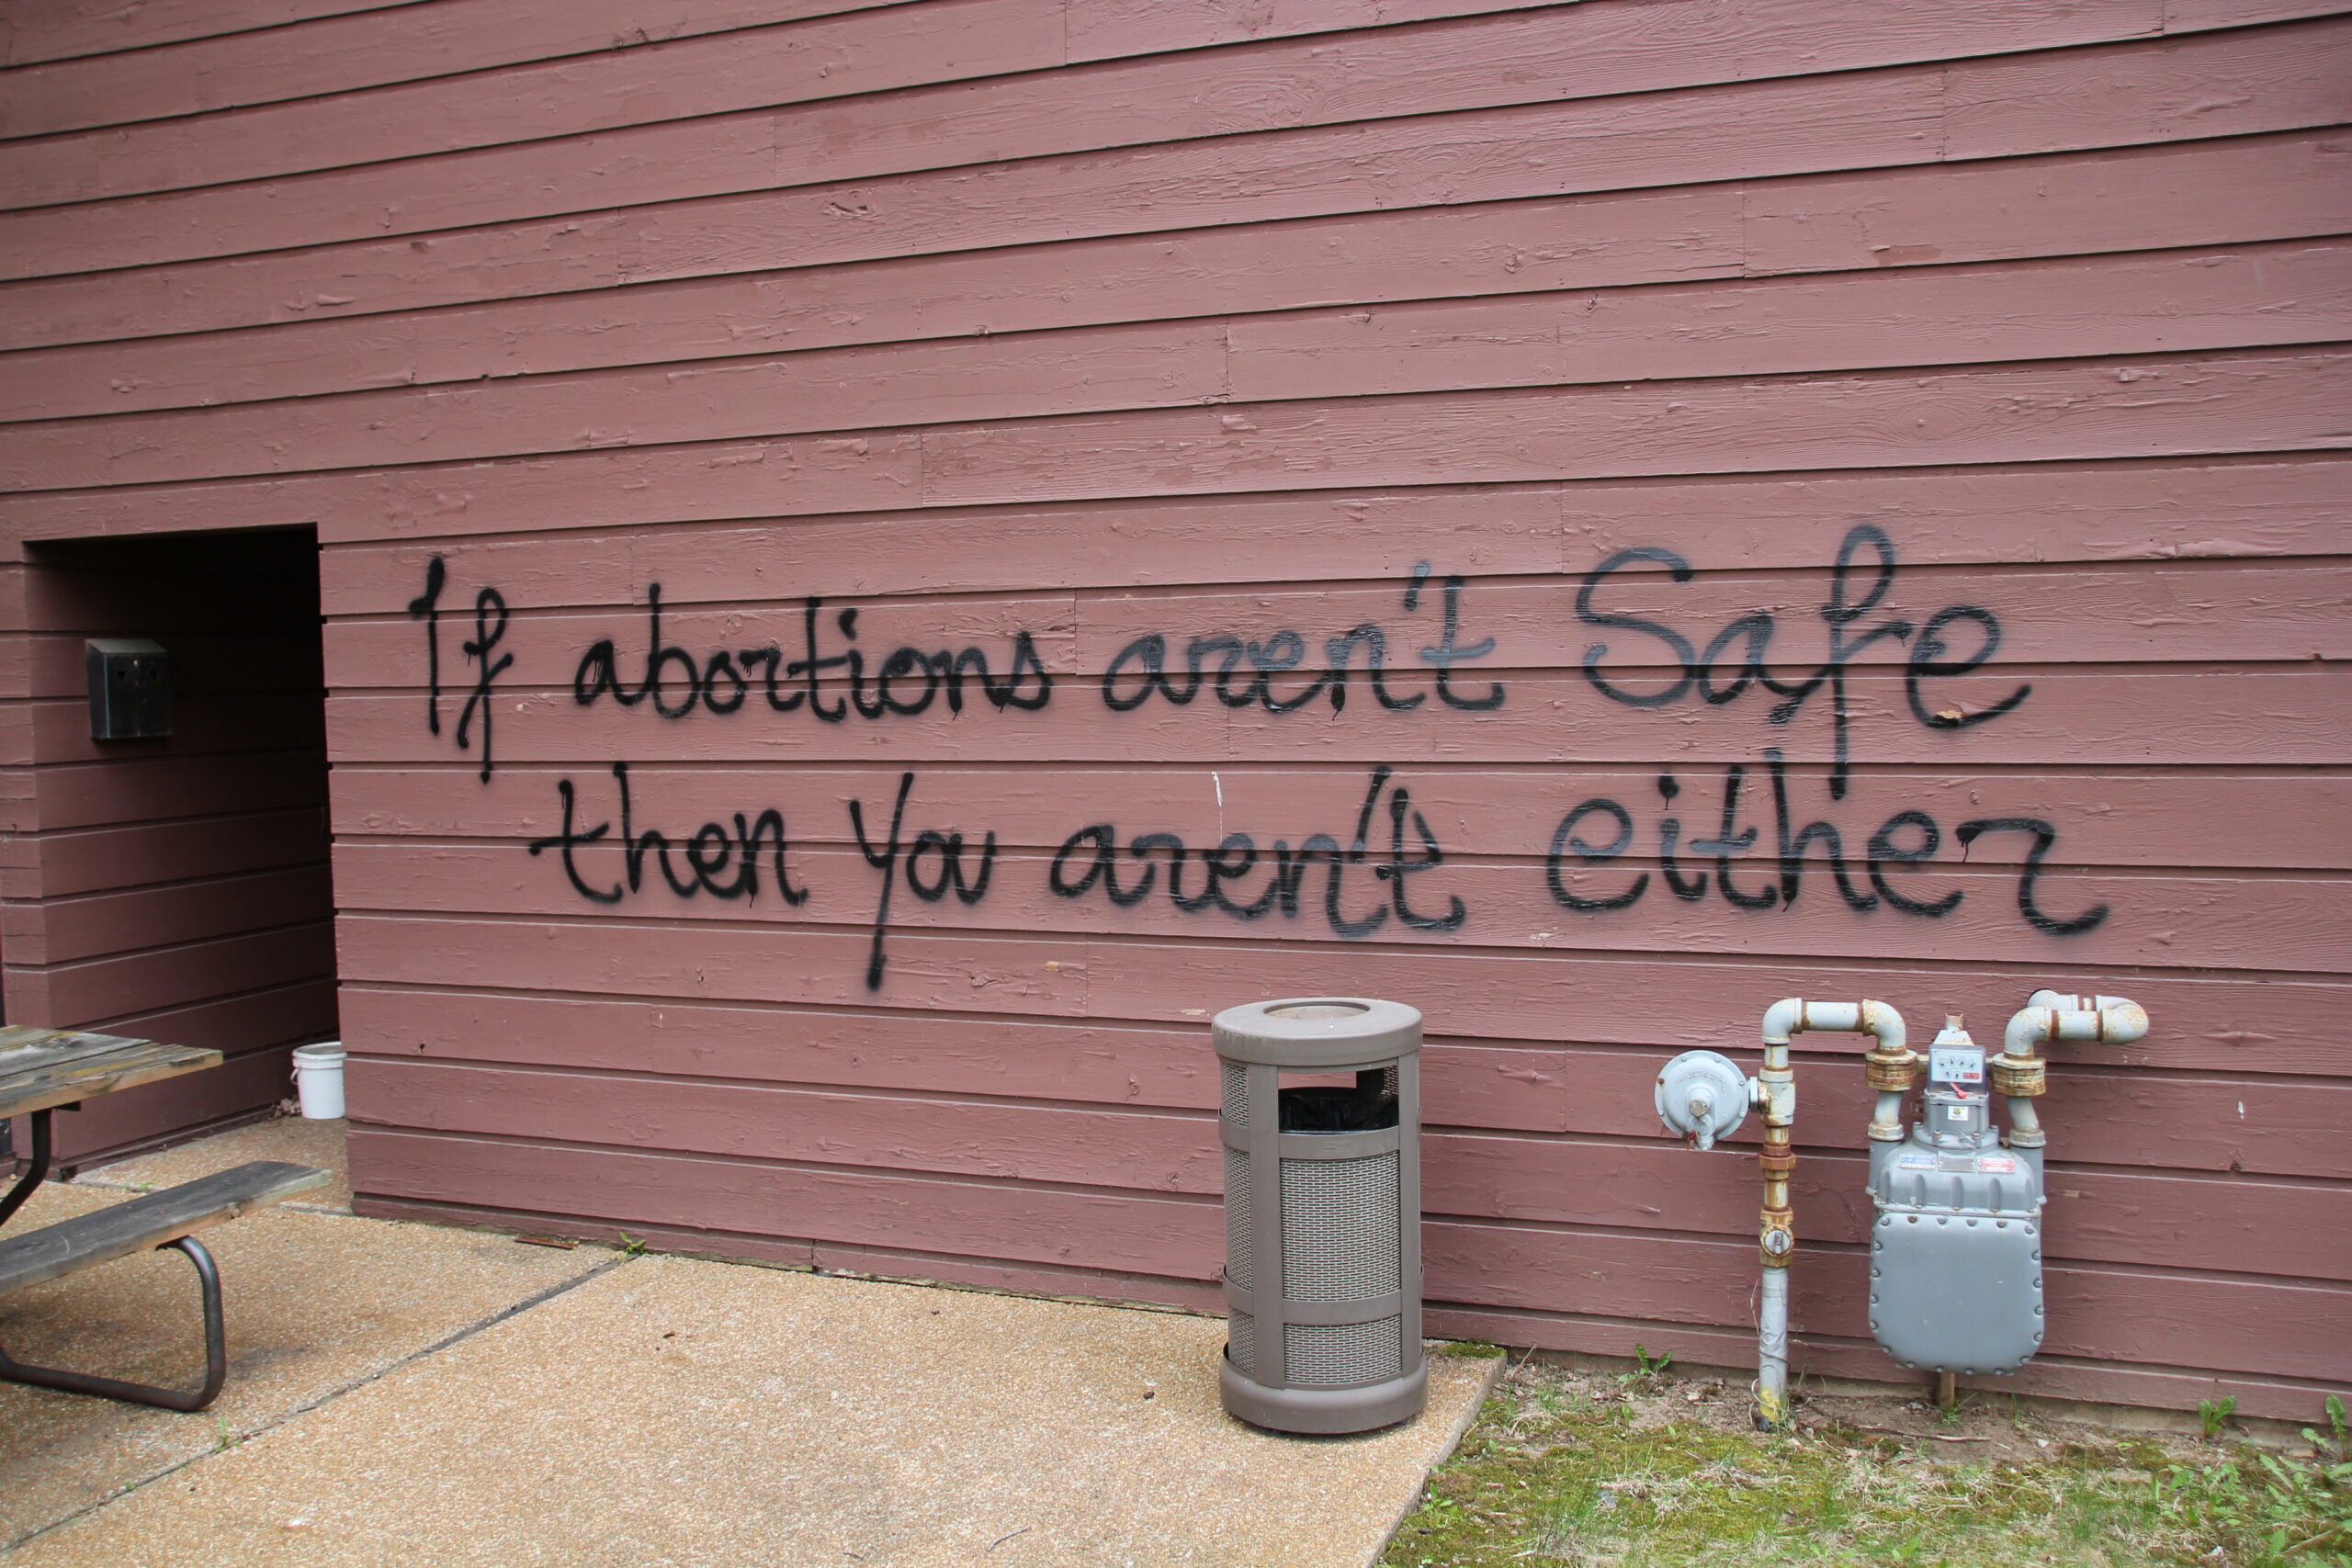 The words "If abortions aren't safe then you aren't either" were painted in black on the building of the Wisconsin Family Action's offices in Madison